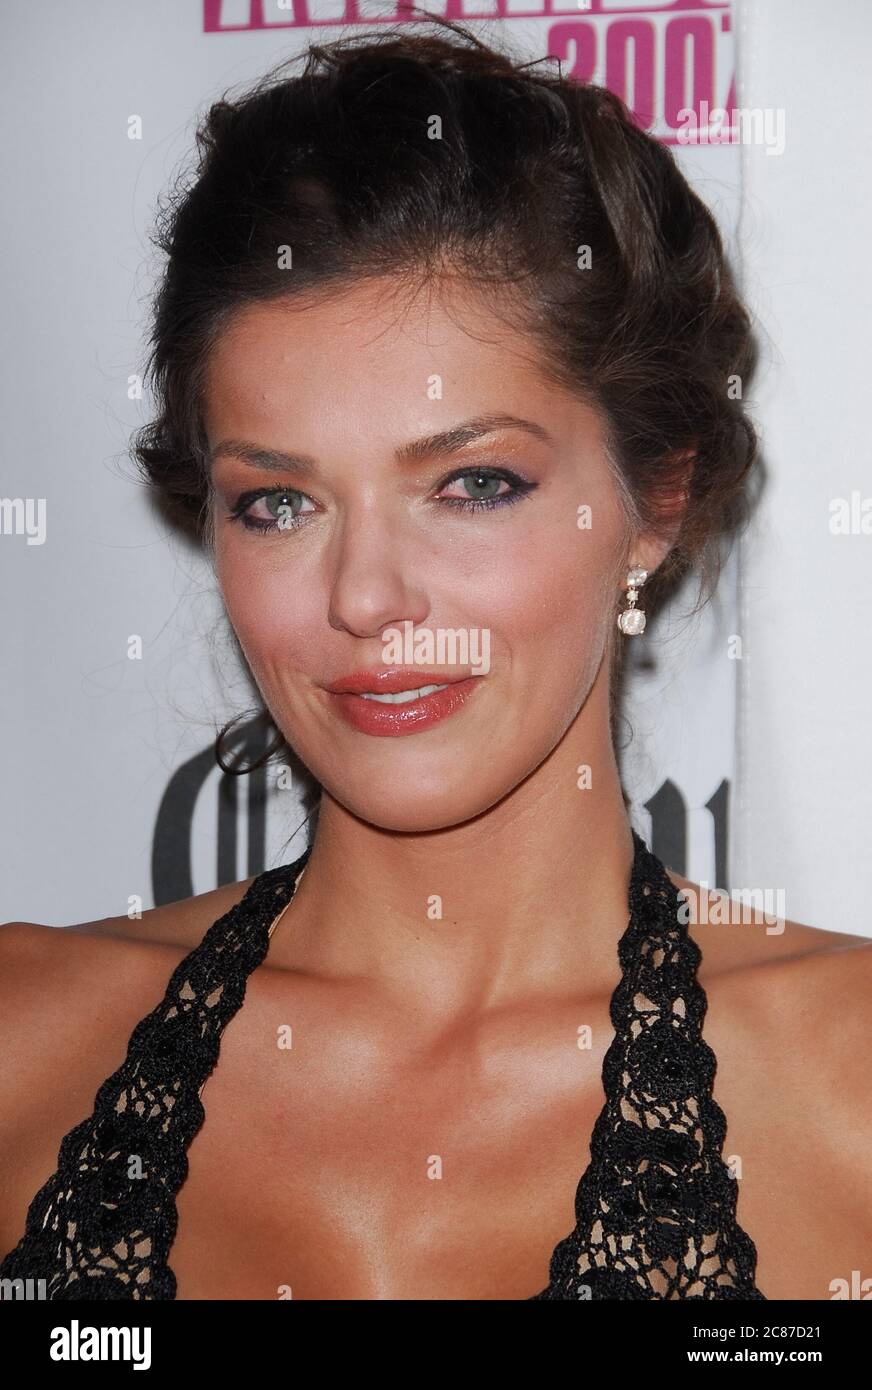 Adrianne Curry at the FOX Reality Channell Really Awards 2007 held at Boulevard3 in Hollywood, CA. The event took place on Tuesday, October 2, 2007. Photo by: SBM / PictureLux- File Reference # 34006-9023SBMPLX Stock Photo